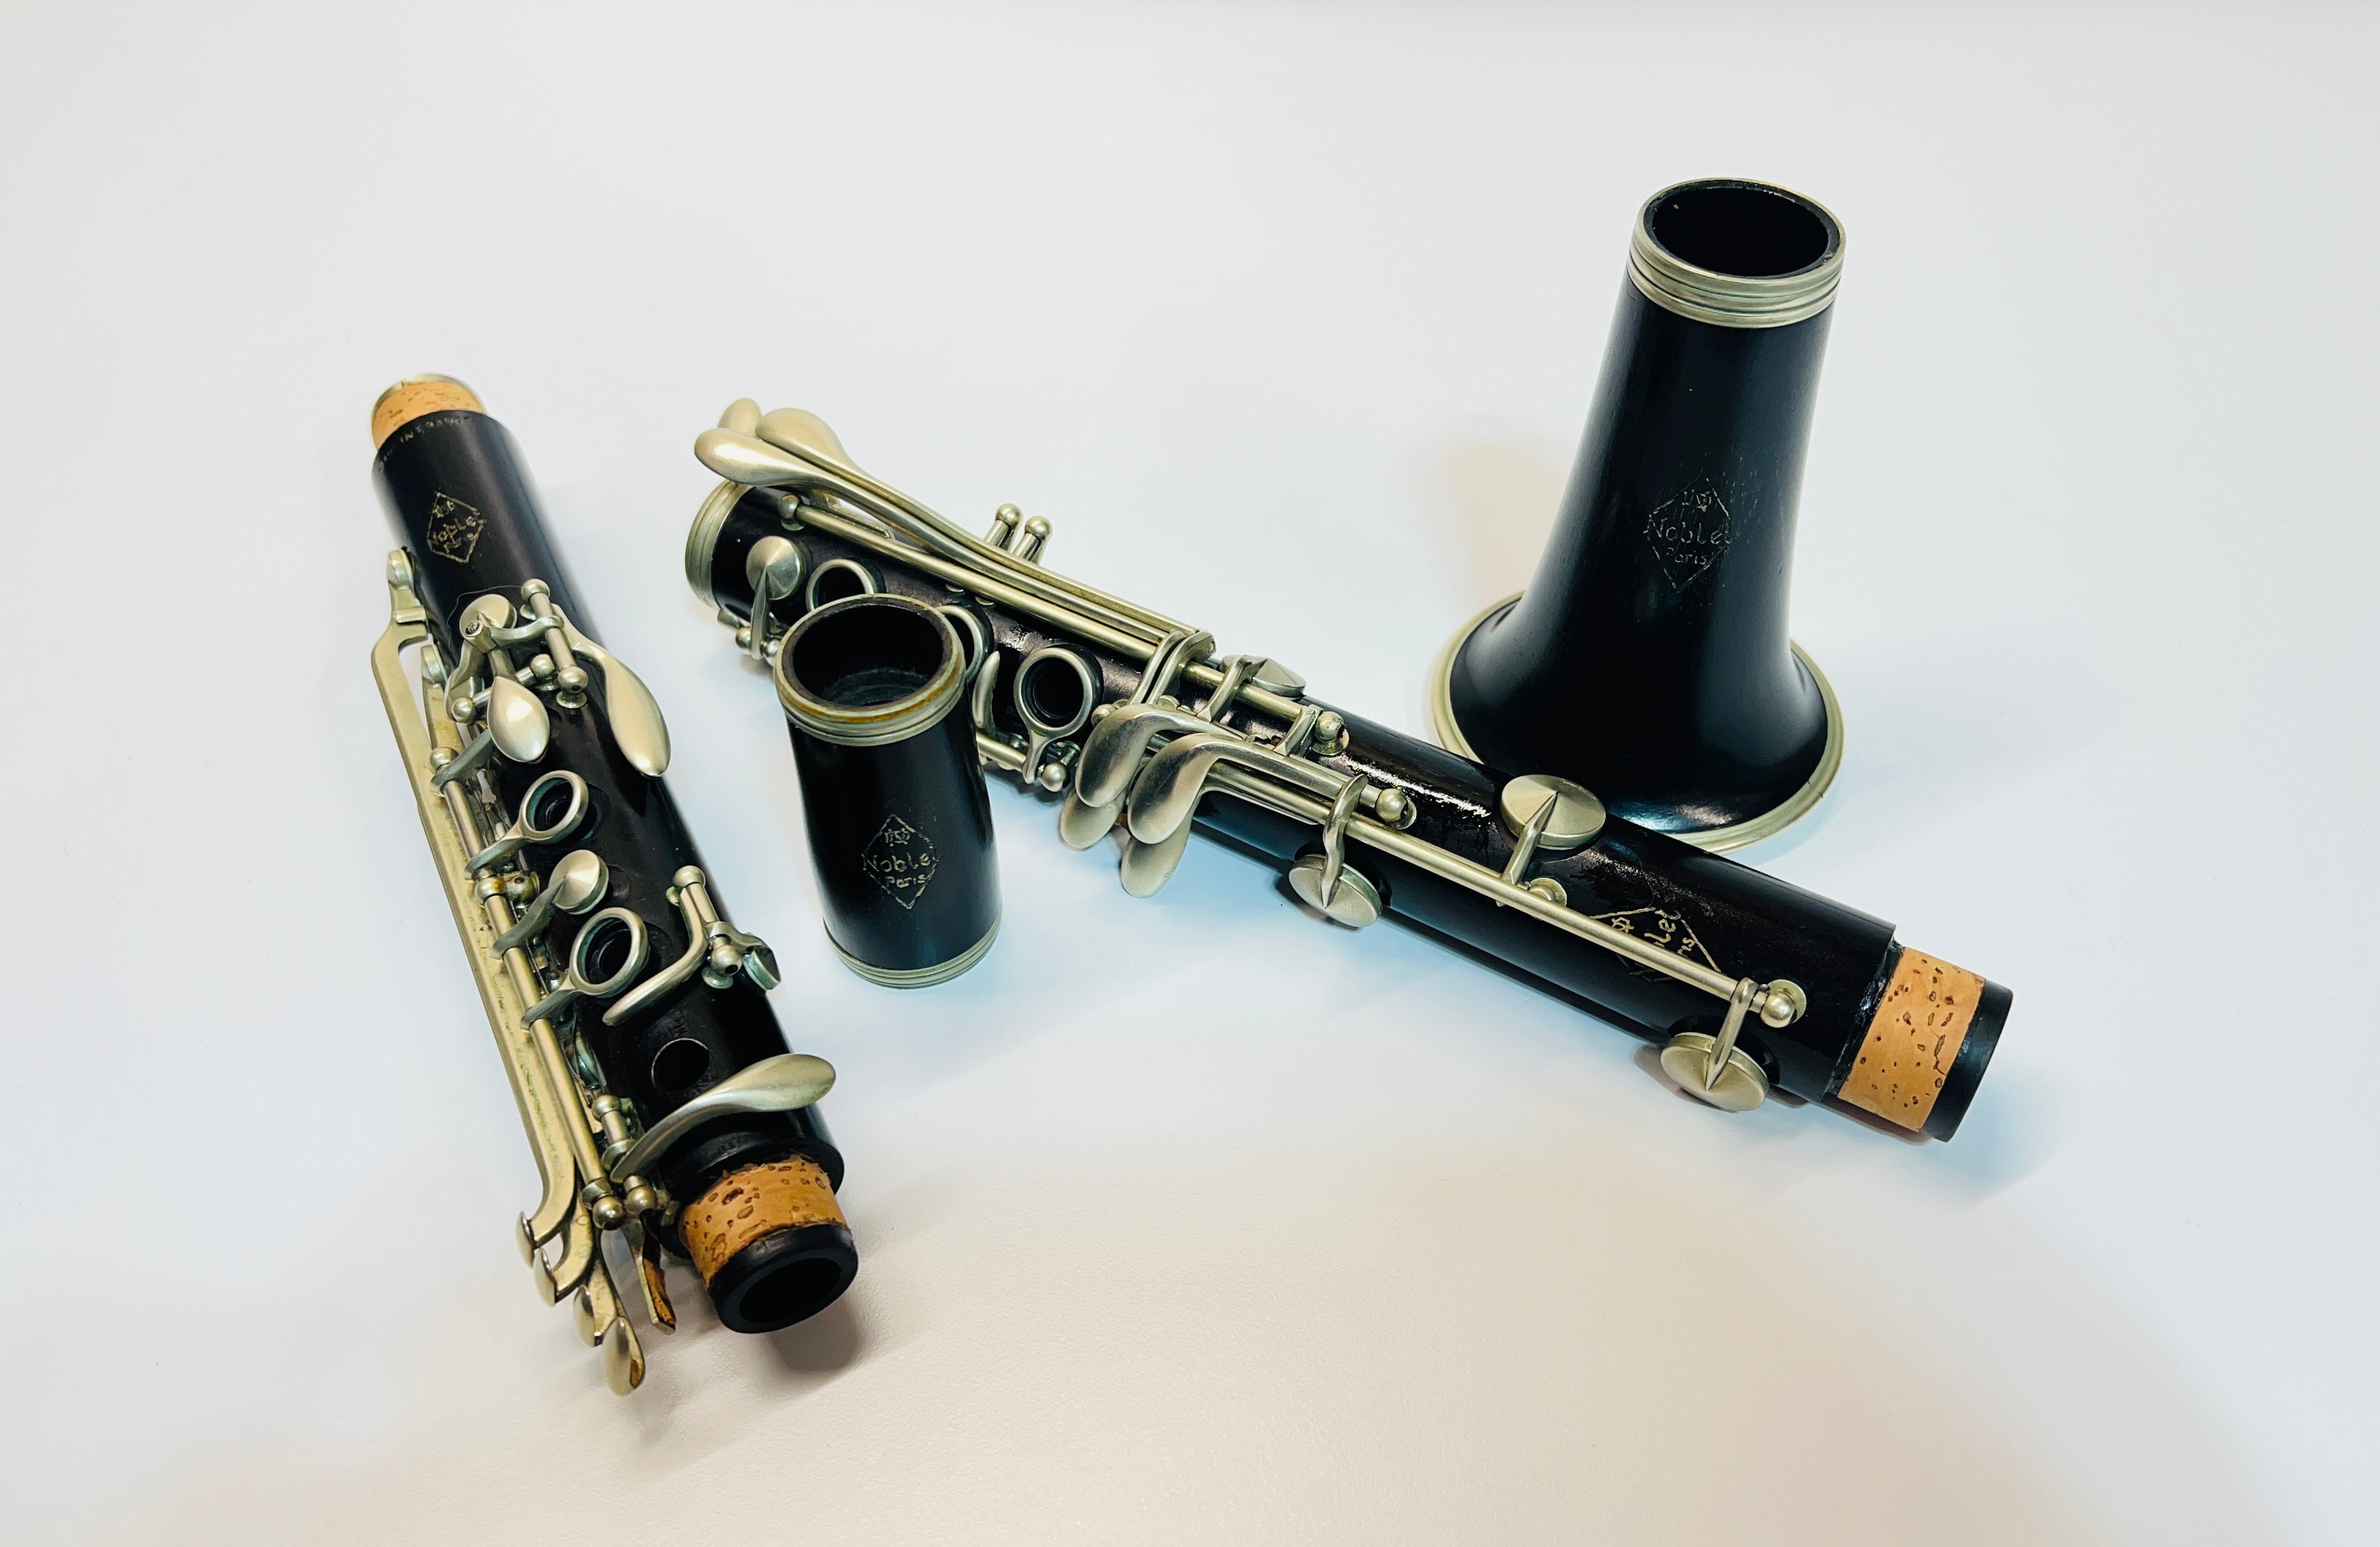 Noblet France Clarinet Made of Wood LeBlanc Recently Serviced Plays Well USED